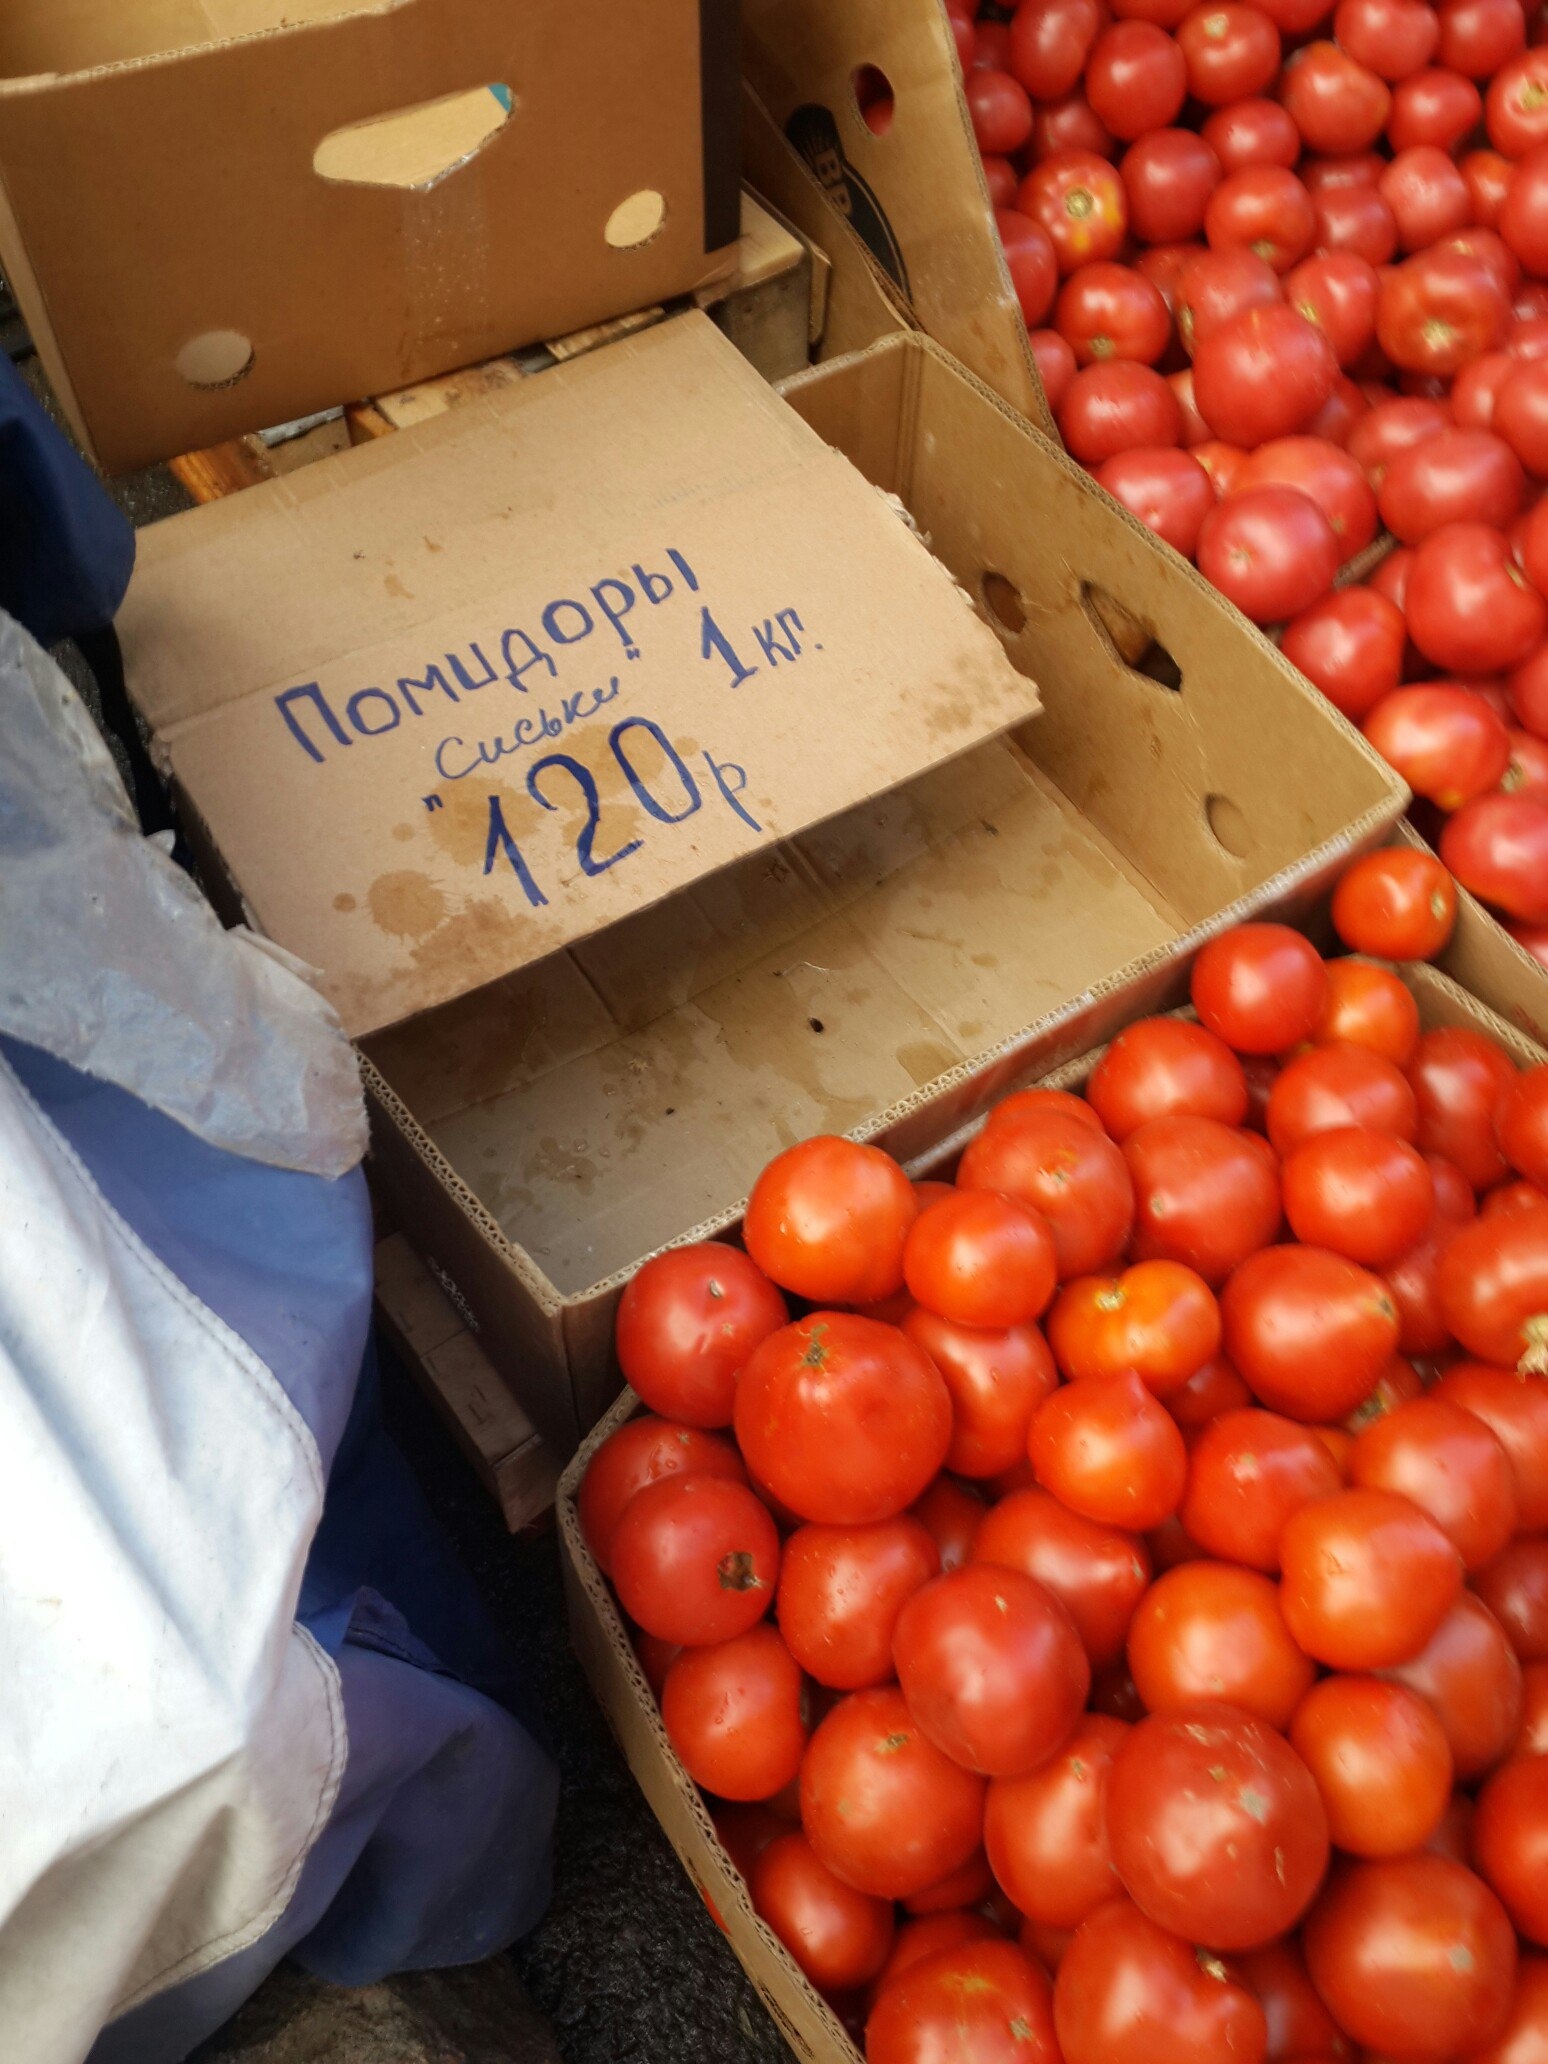 The gods of marketing - Tomatoes, Trade